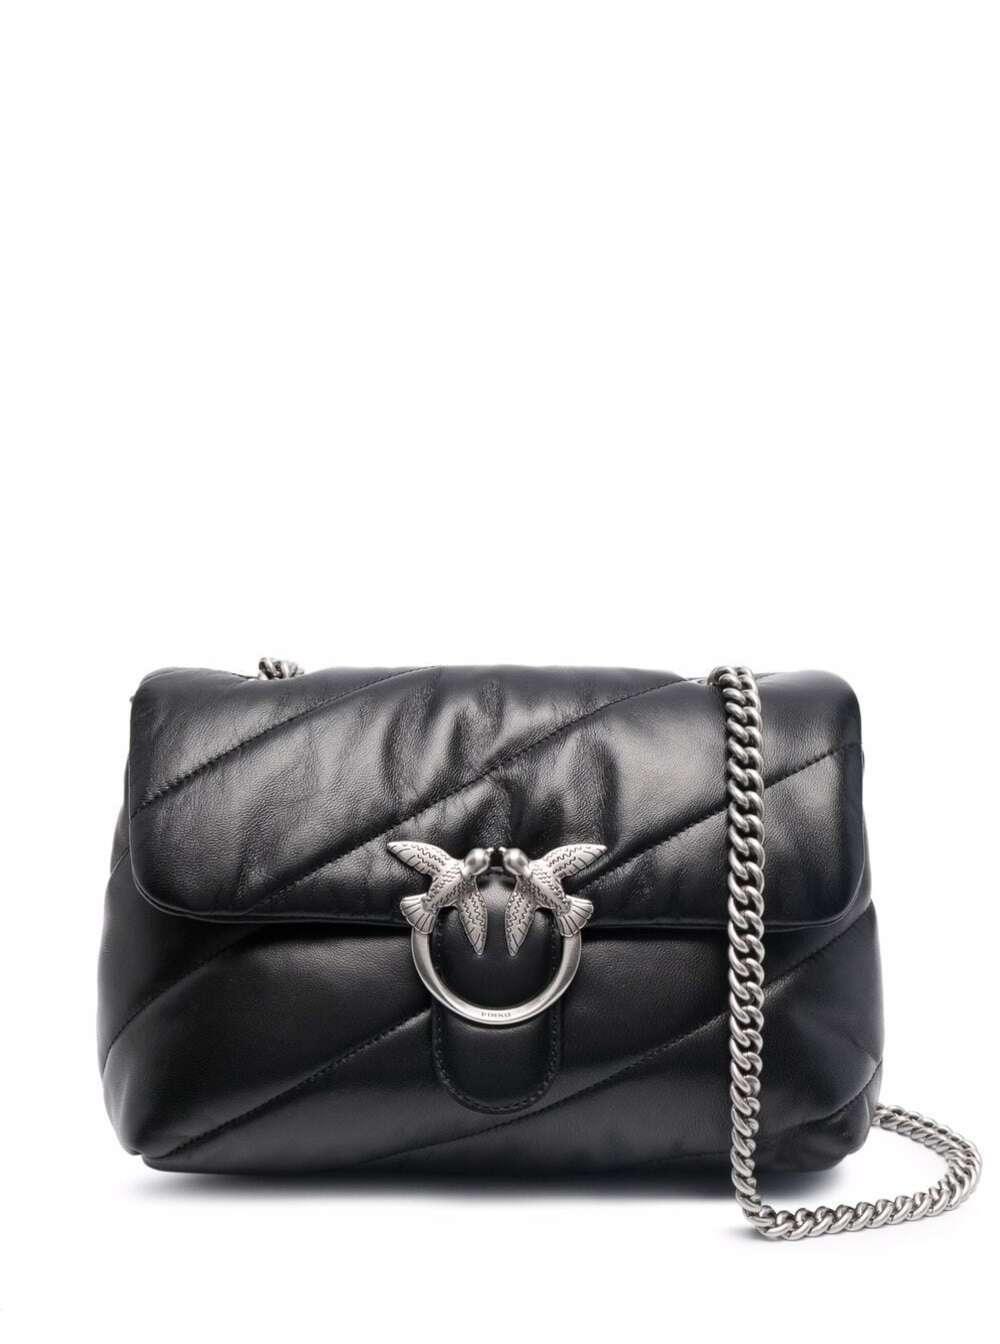 Pinko Love Puff Black Quilted Leather Crossbody Bag